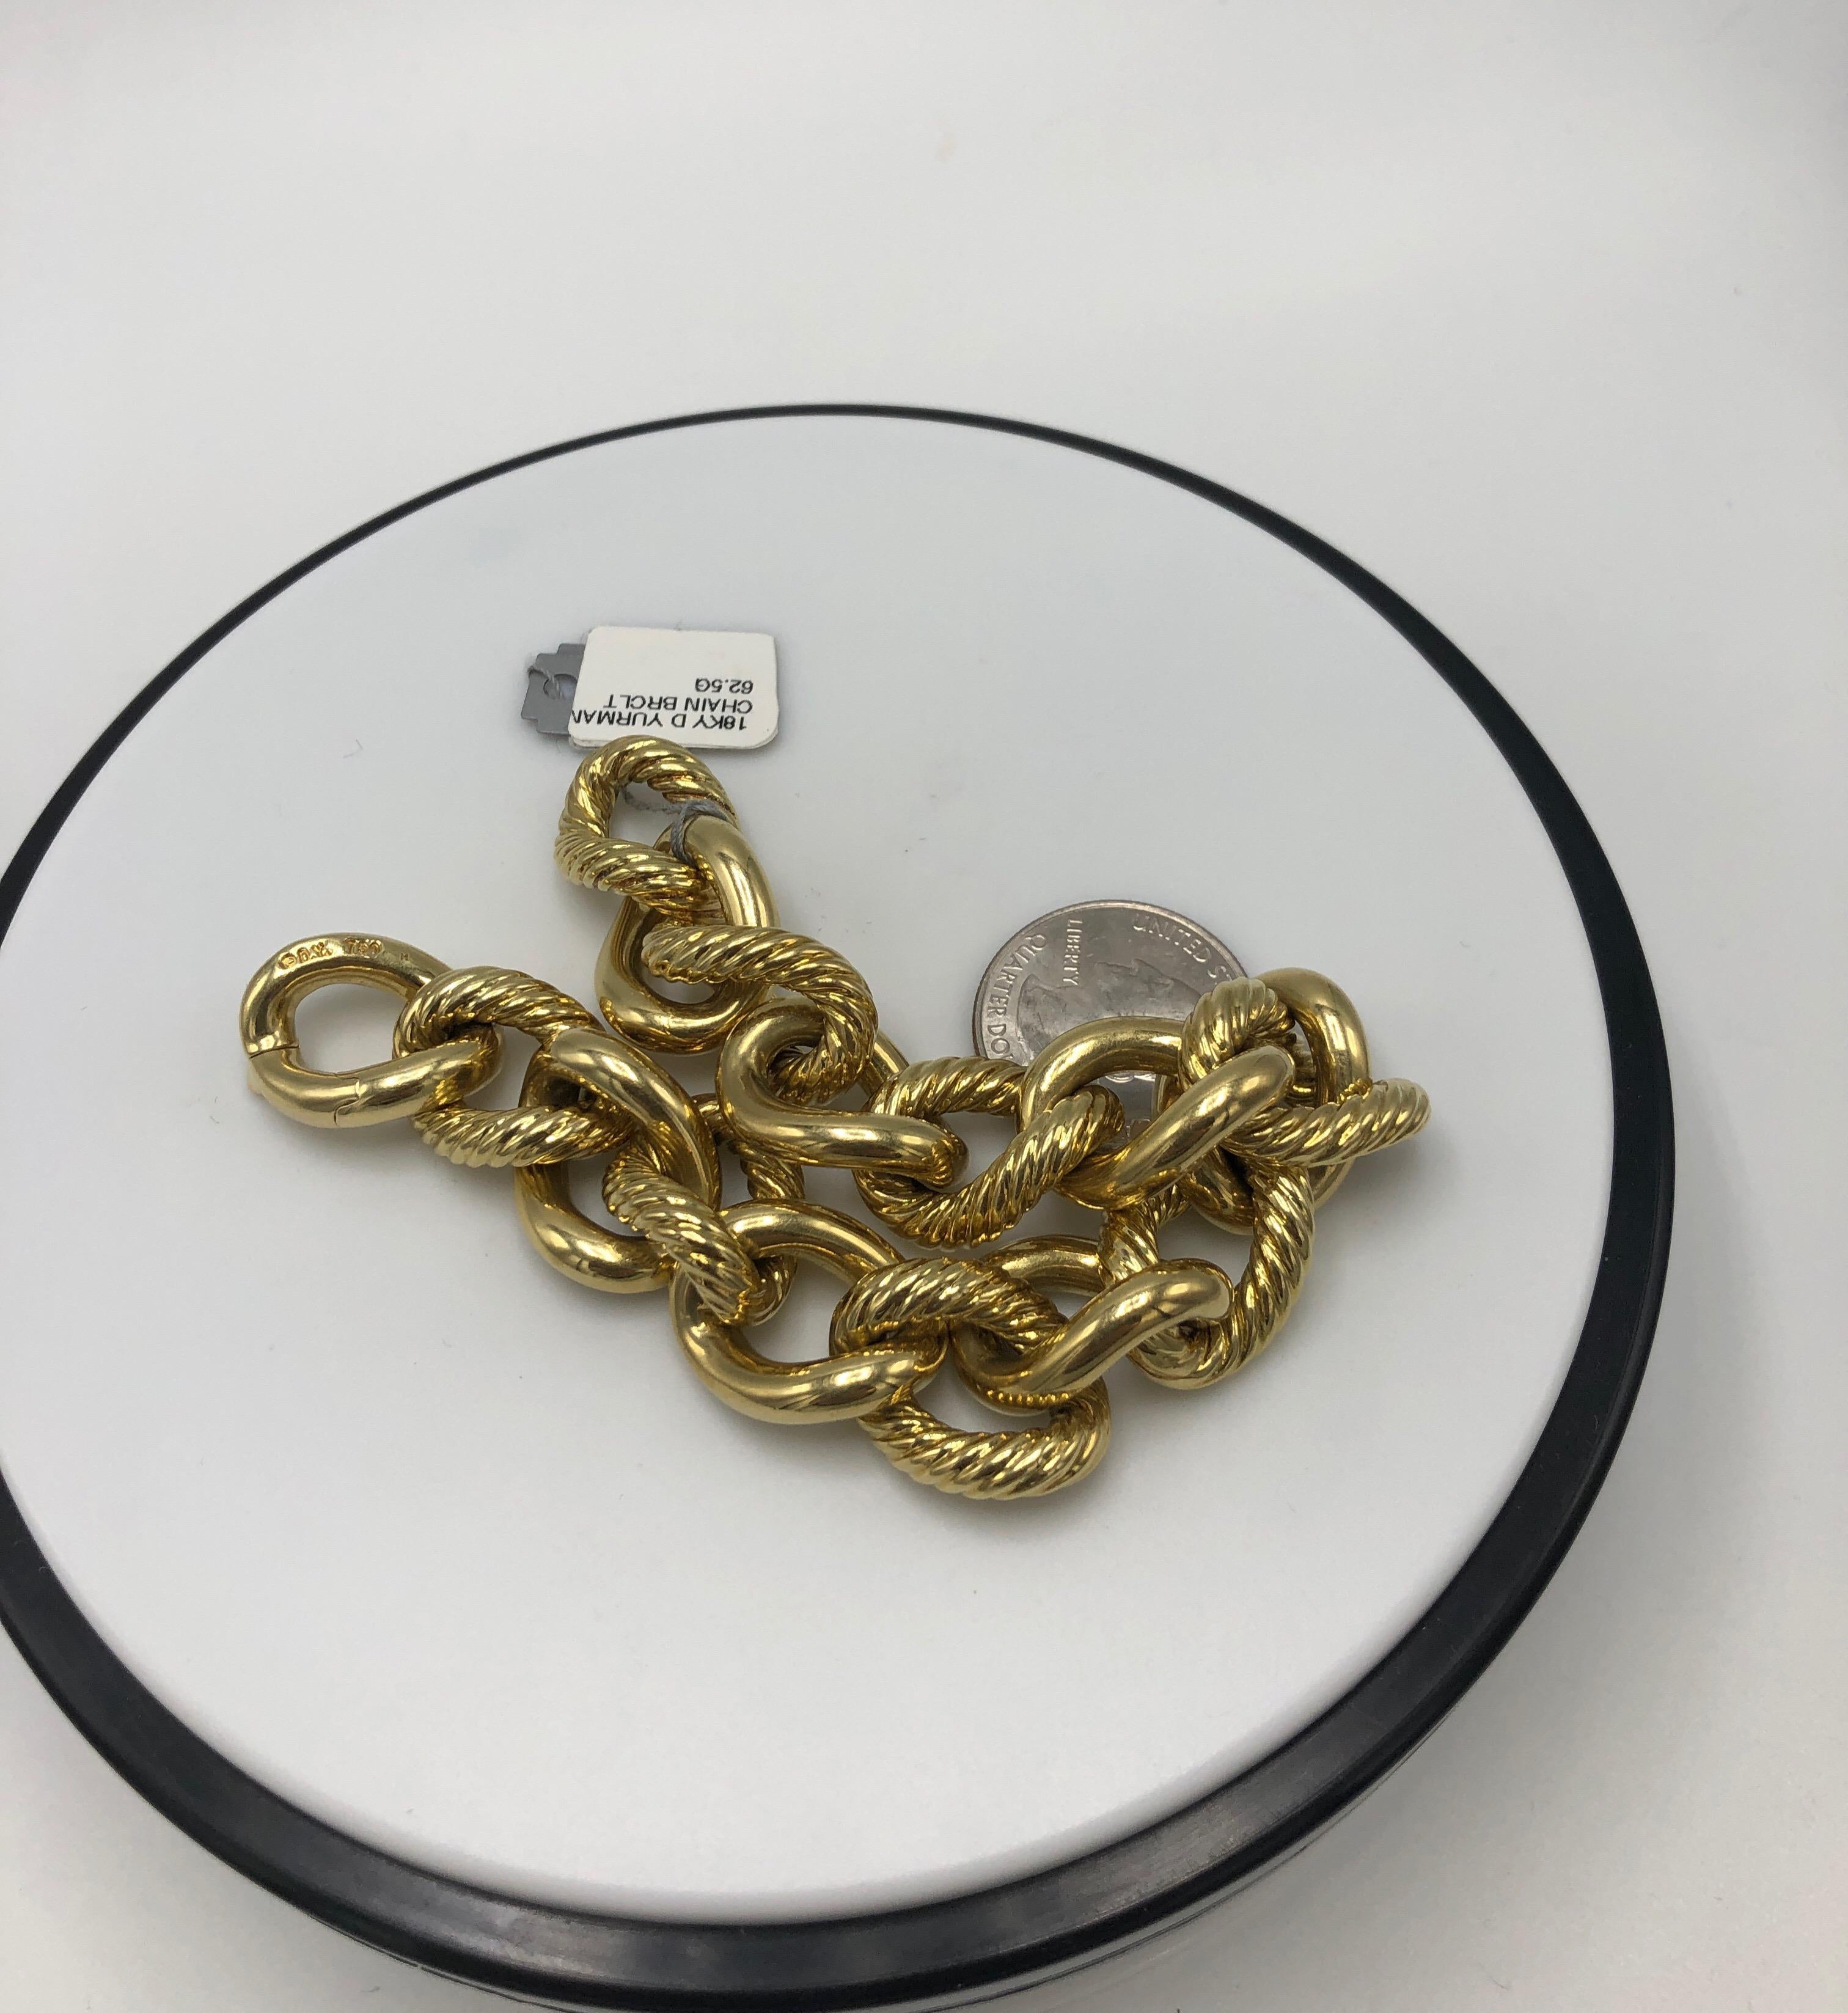 David Yurman 18k Yellow Gold Curb Link Bracelet.  Fits Size 8 Wrist. Measures approximately 8 inches. Hidden Clasp. The dual texture links give this item the ability to go from casual to an evening out, without missing a beat. A substantial look,